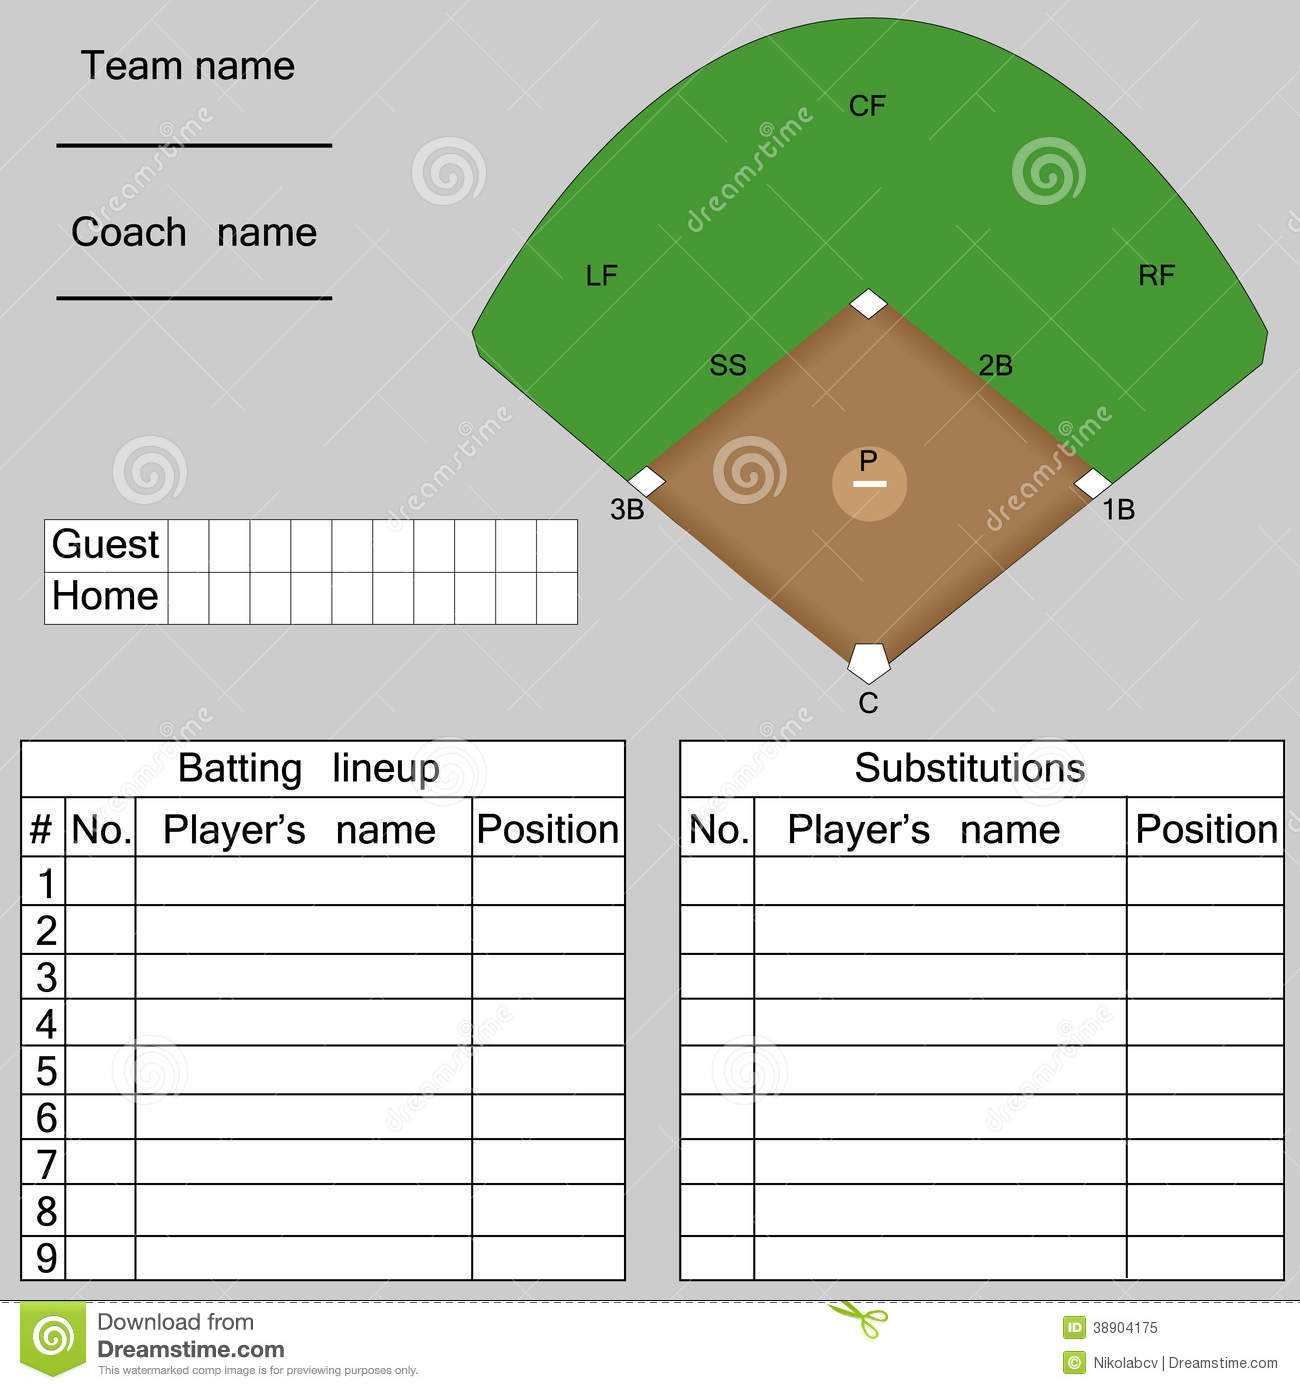 Dugout Lineup Card Template ] – Check Out Some Of The Lineup Inside Dugout Lineup Card Template